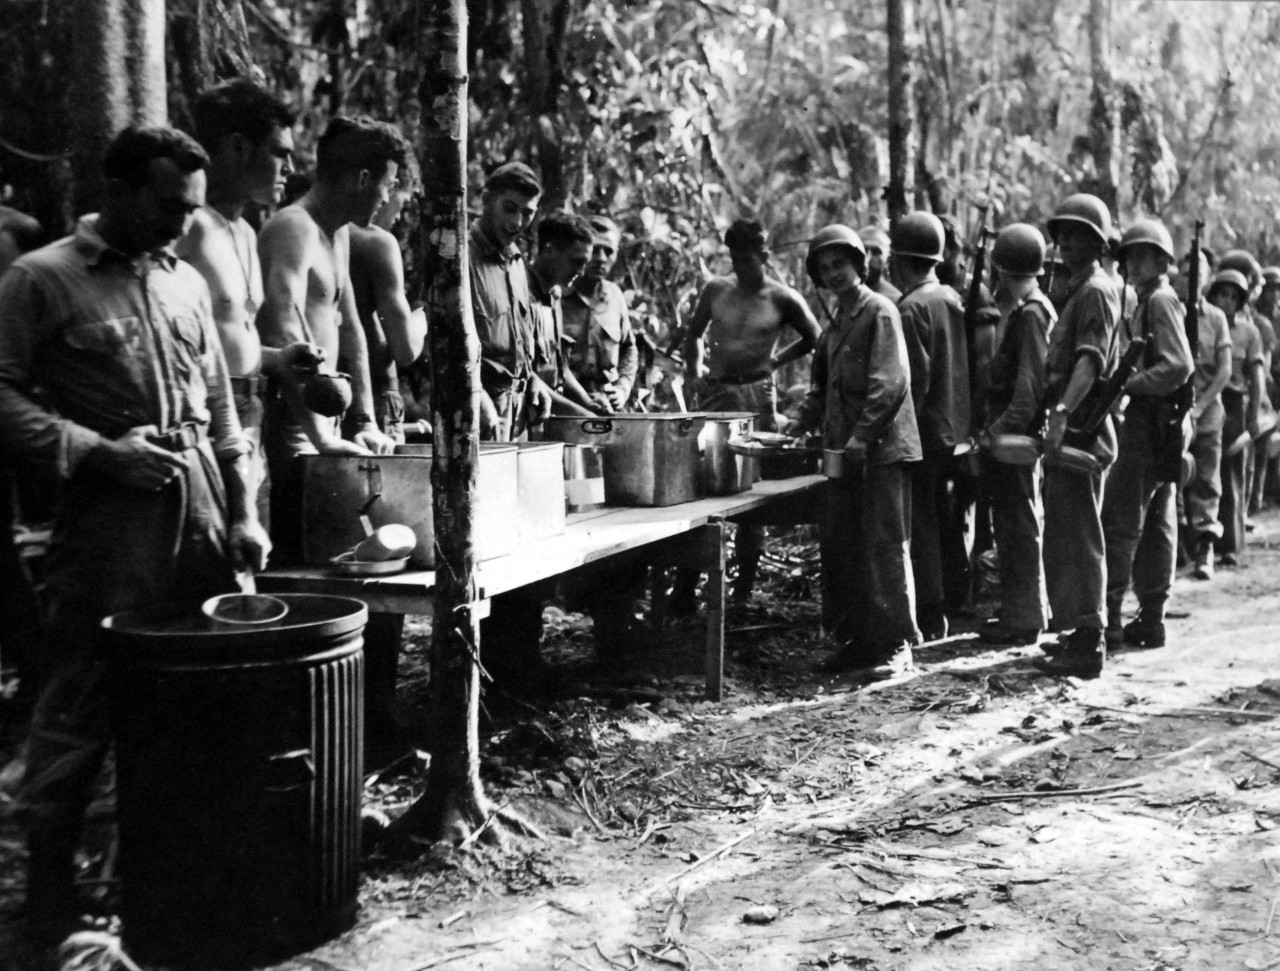 LC-Lot-801-14:  Guadalcanal Campaign, 7 August 1942 – February 9 1943. U.S. Marines line up for a meal which is served cafeteria style.  This picture was taken shortly after U.S. Forces had blasted the Japanese out of several of their positions on the islands.   U.S. Marine Corps Photograph.  Photographed through Mylar sleeve.  Courtesy of the Library of Congress.  (2015/11/06).